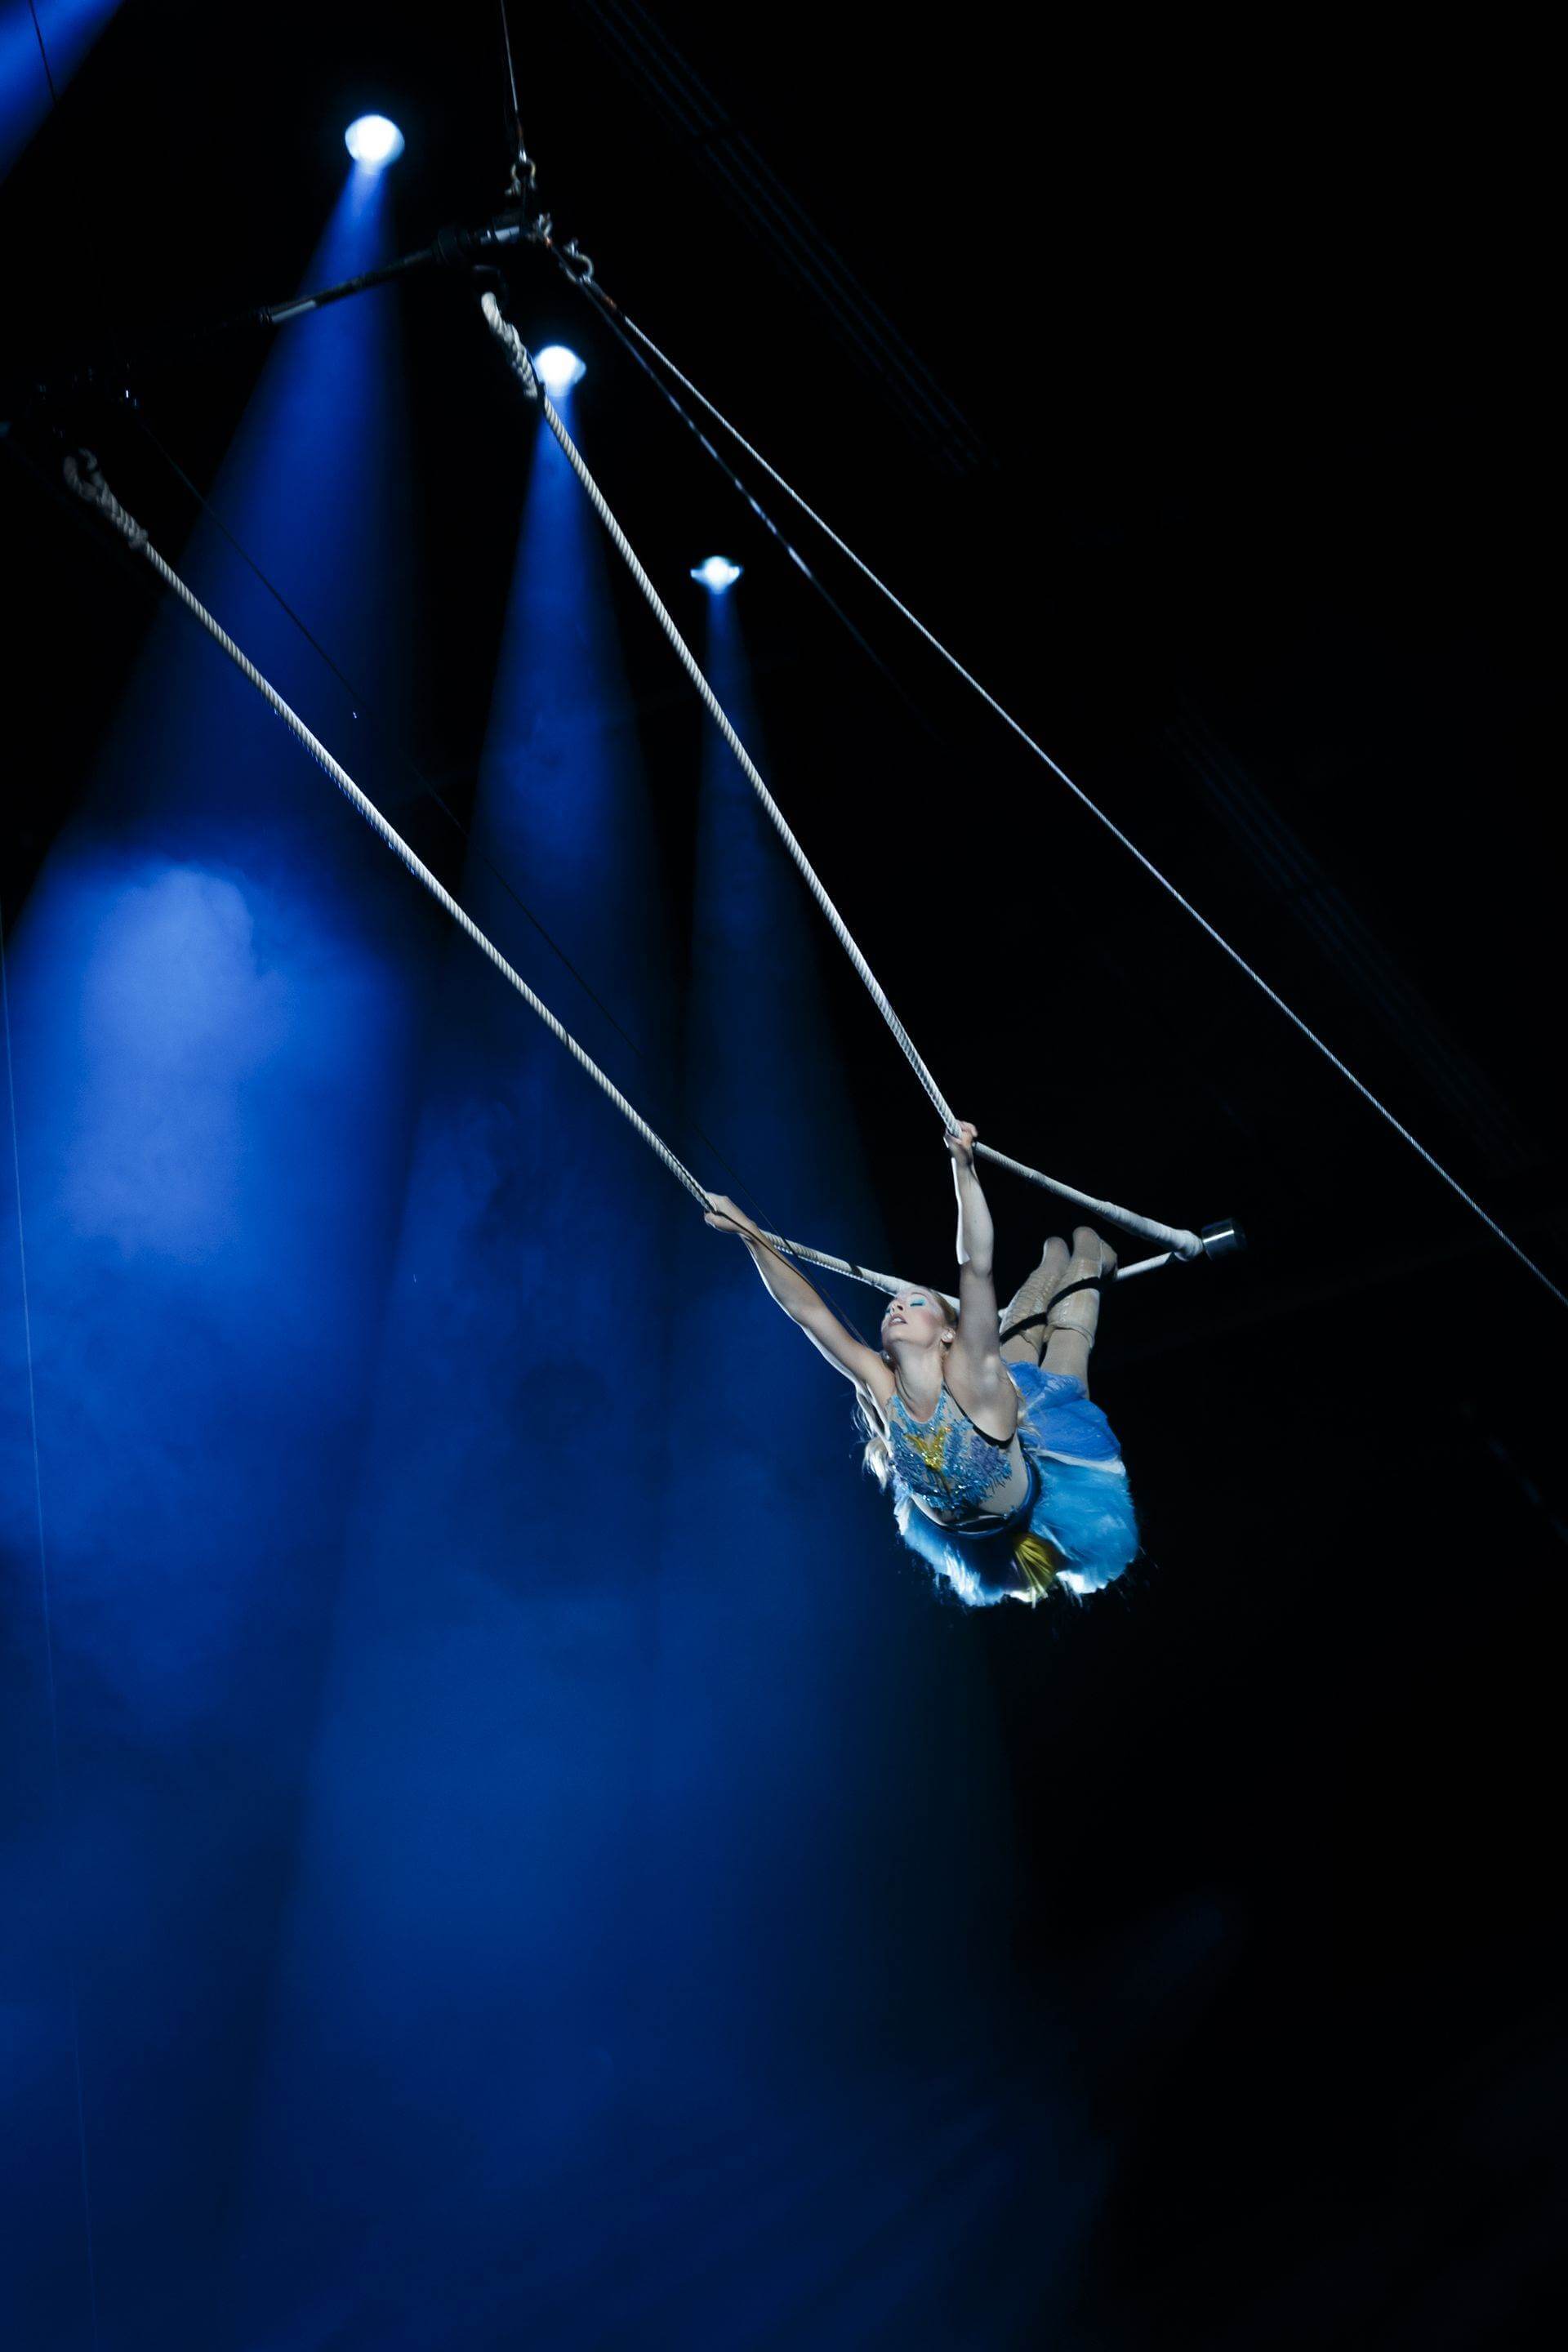 Scalada - Stelar by Cirque du Soleil 2017: Acrobatic jumps from the trapeze